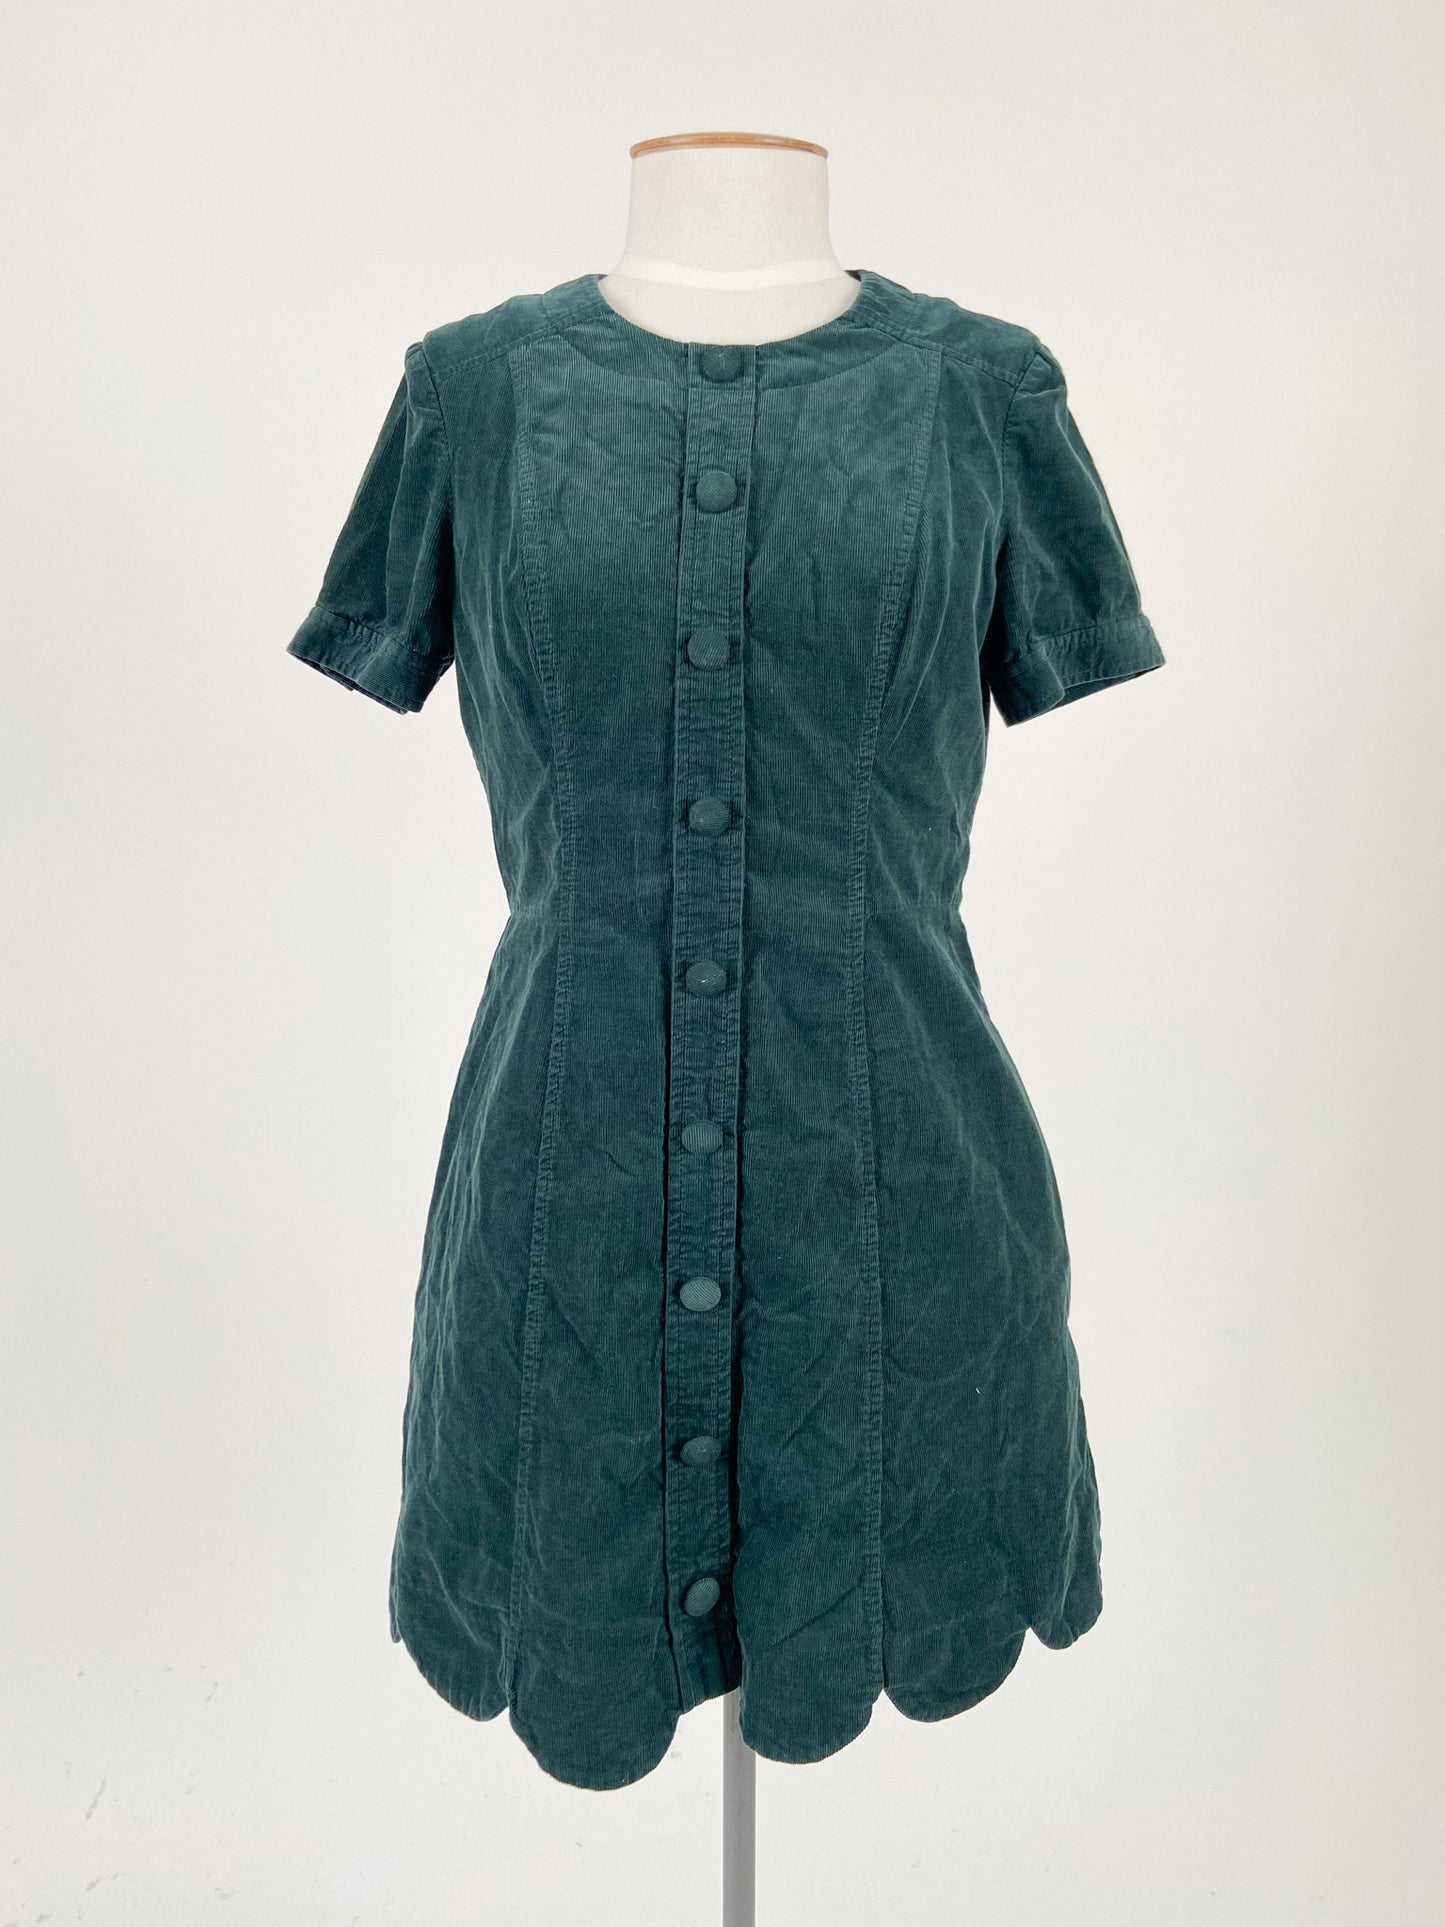 Gal Meets Glam | Green Casual/Workwear Dress | Size 6